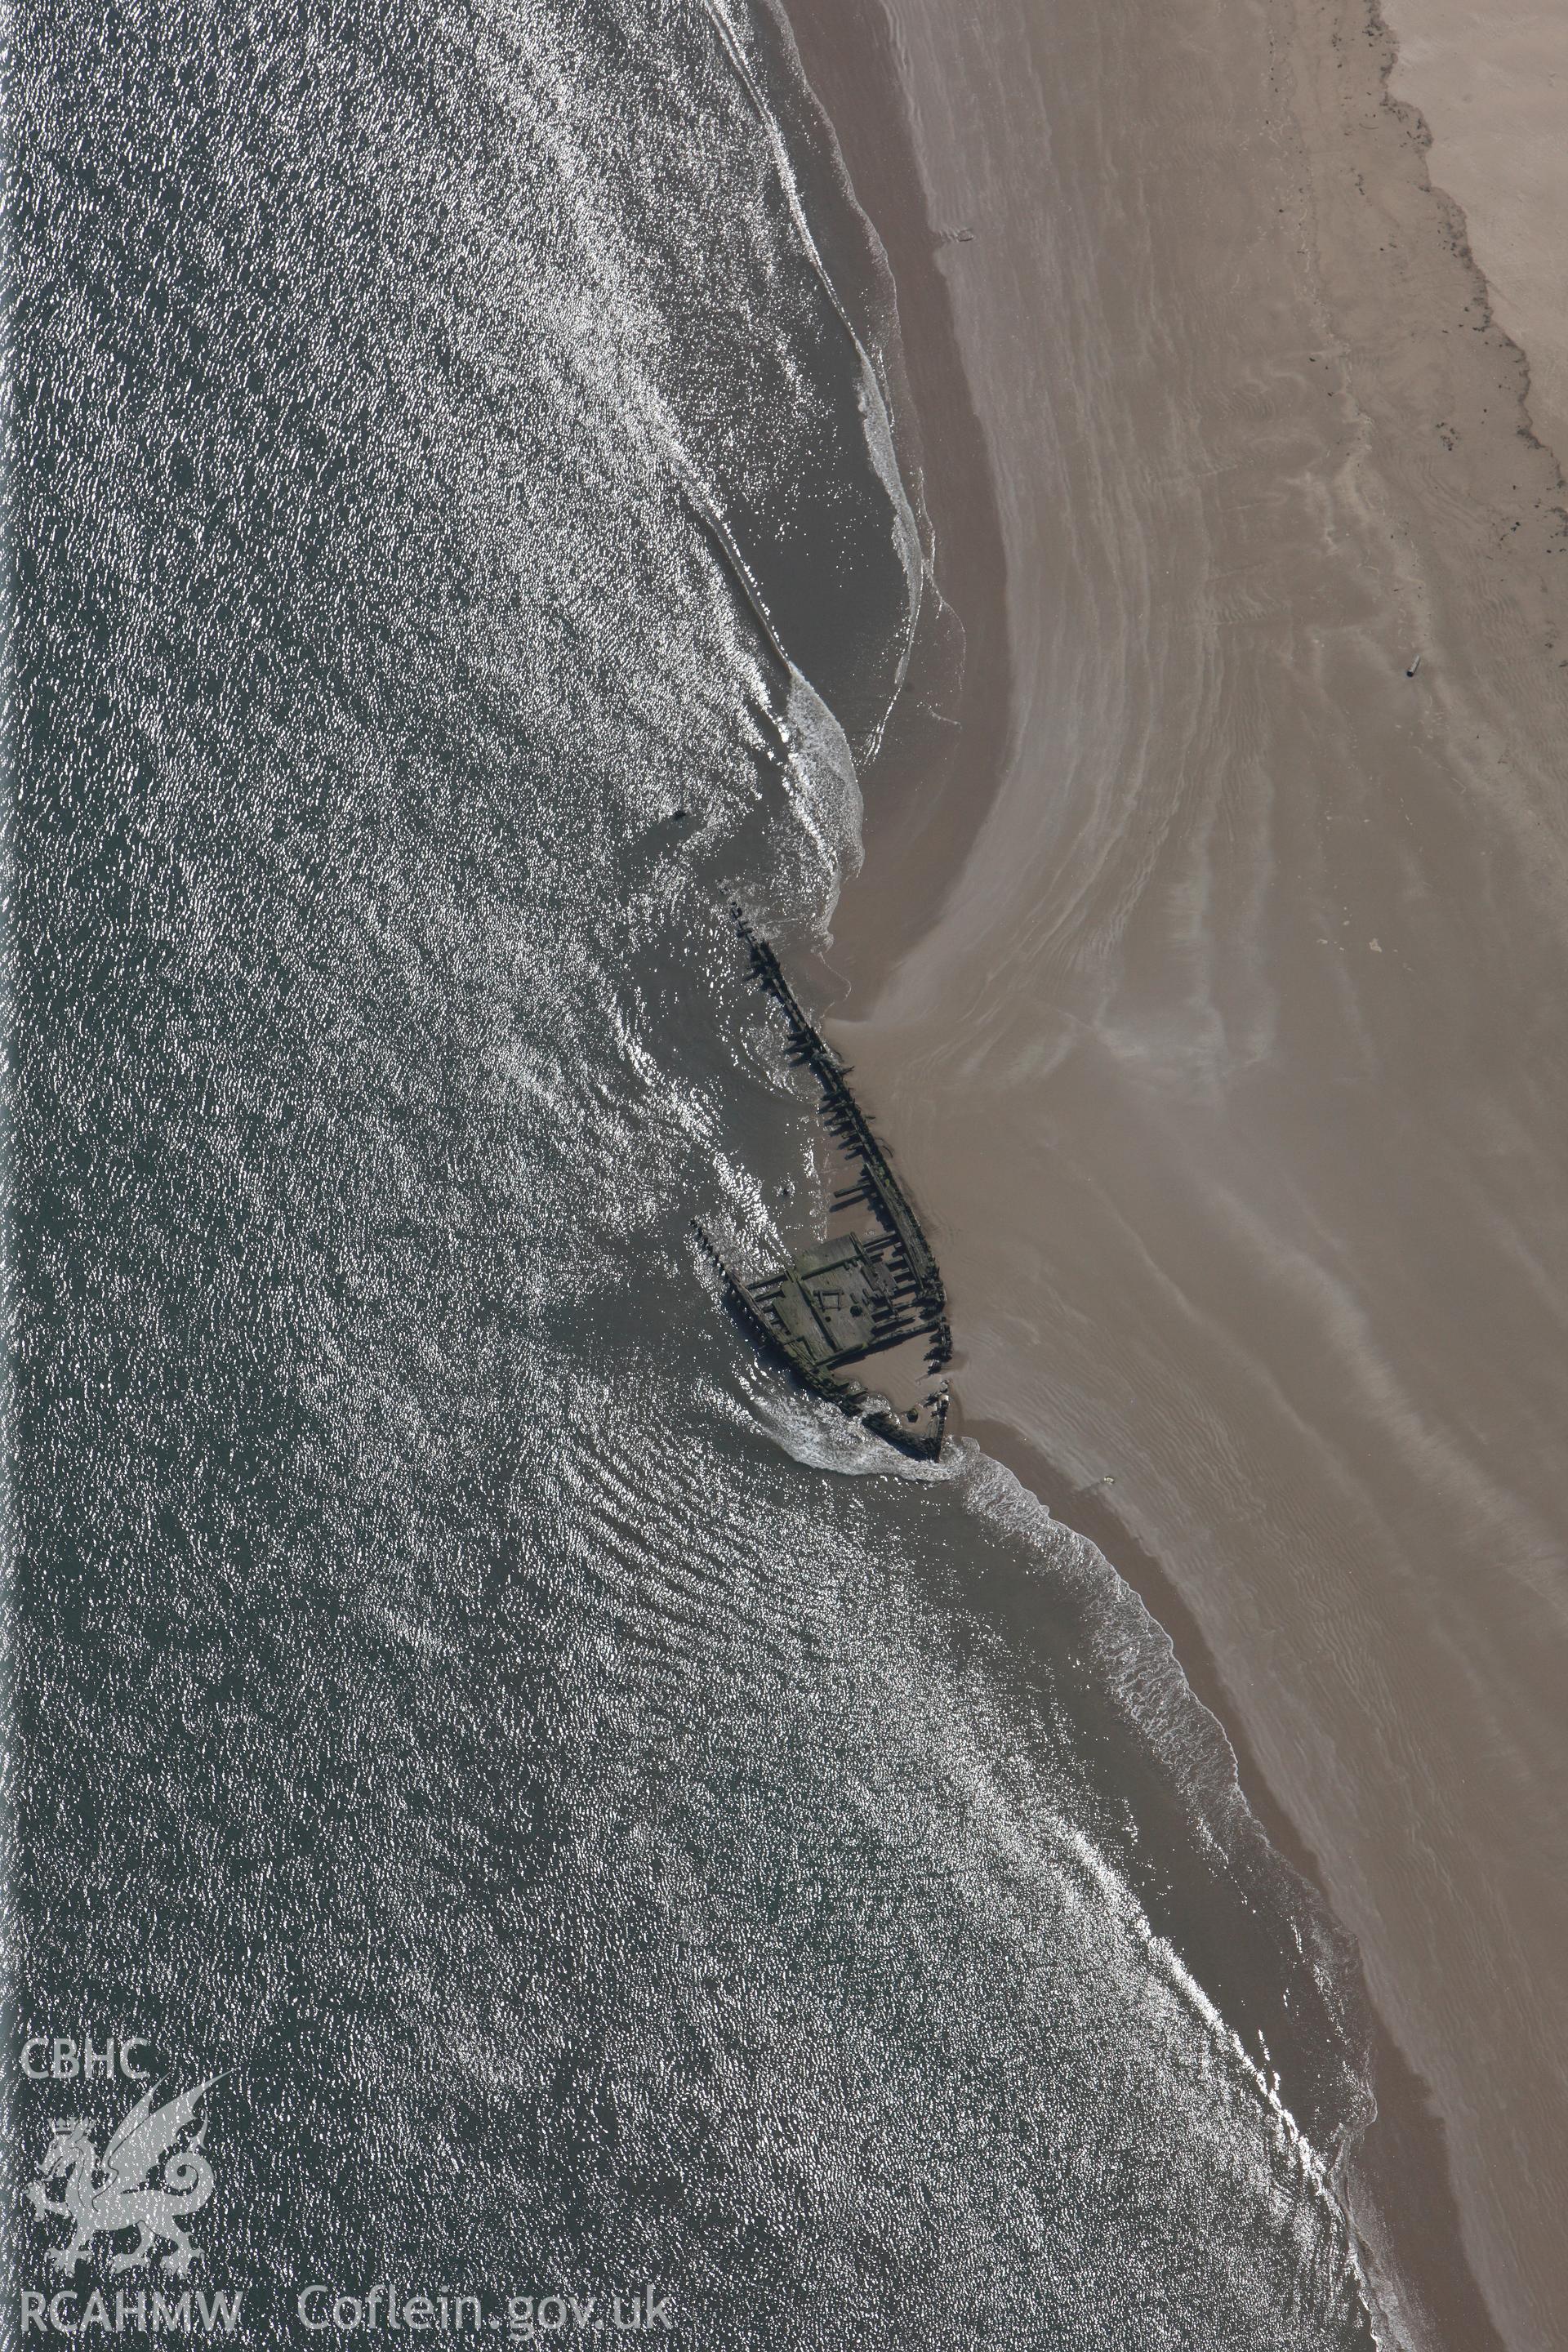 RCAHMW colour oblique photograph of Close view of the wreck Paul, looking east. Taken by Toby Driver on 24/05/2012.